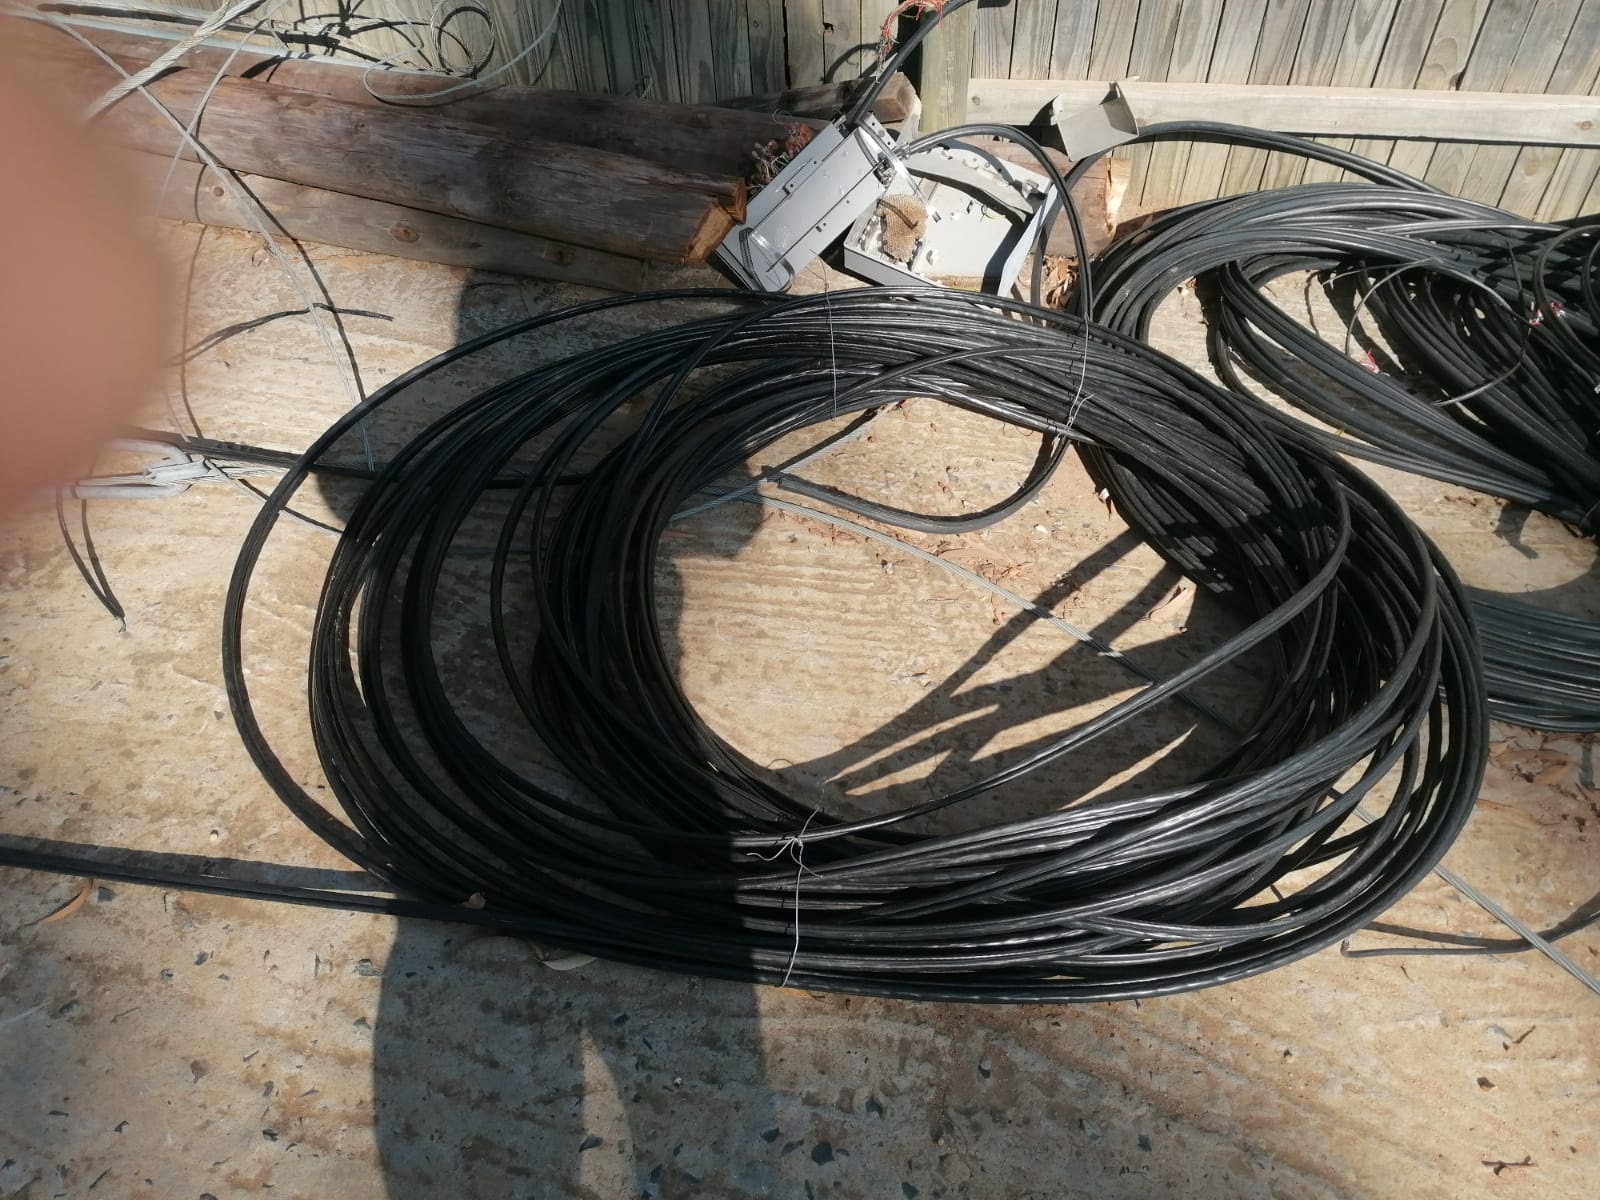 Telkom cables recovered in Mfuleni and Stellenbosch, suspect due in court